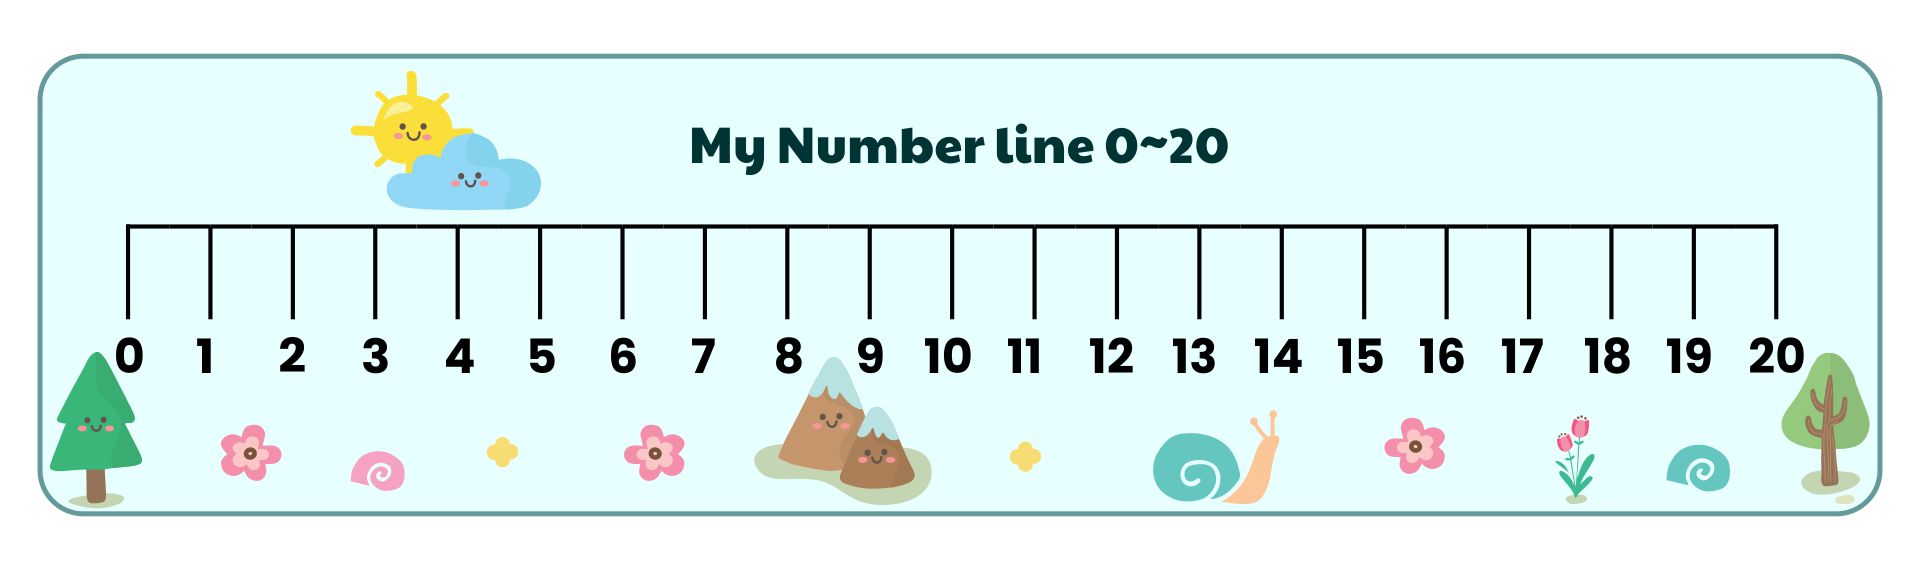 Number Line Images 0 To 20